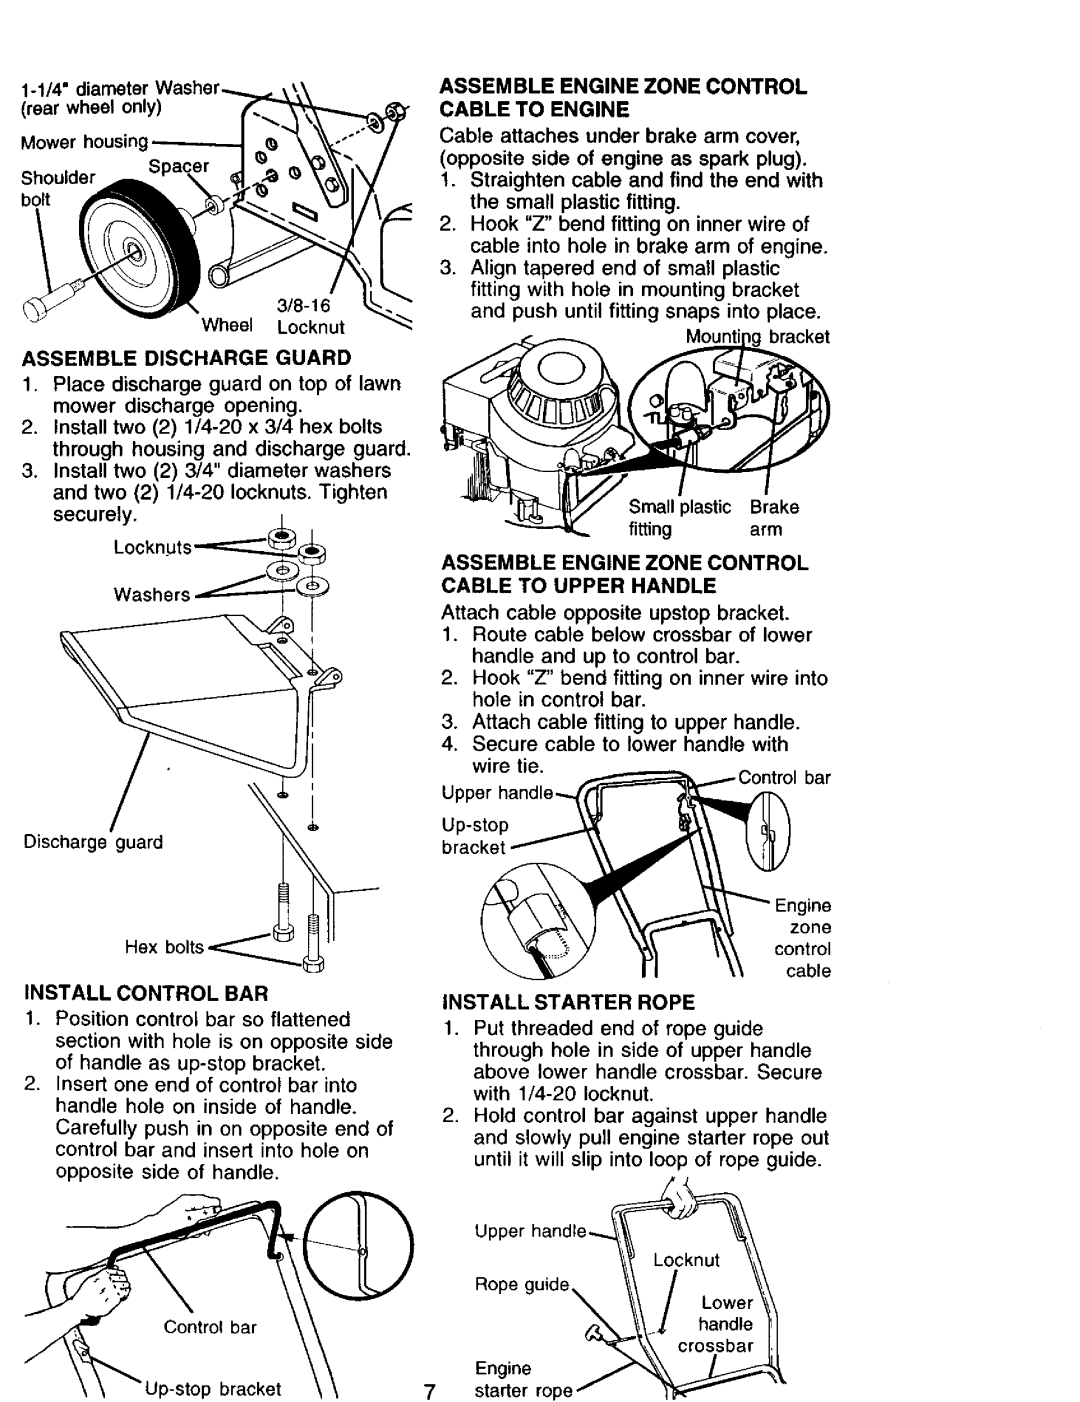 Sears 944.36201 owner manual Assemble Discharge Guard 